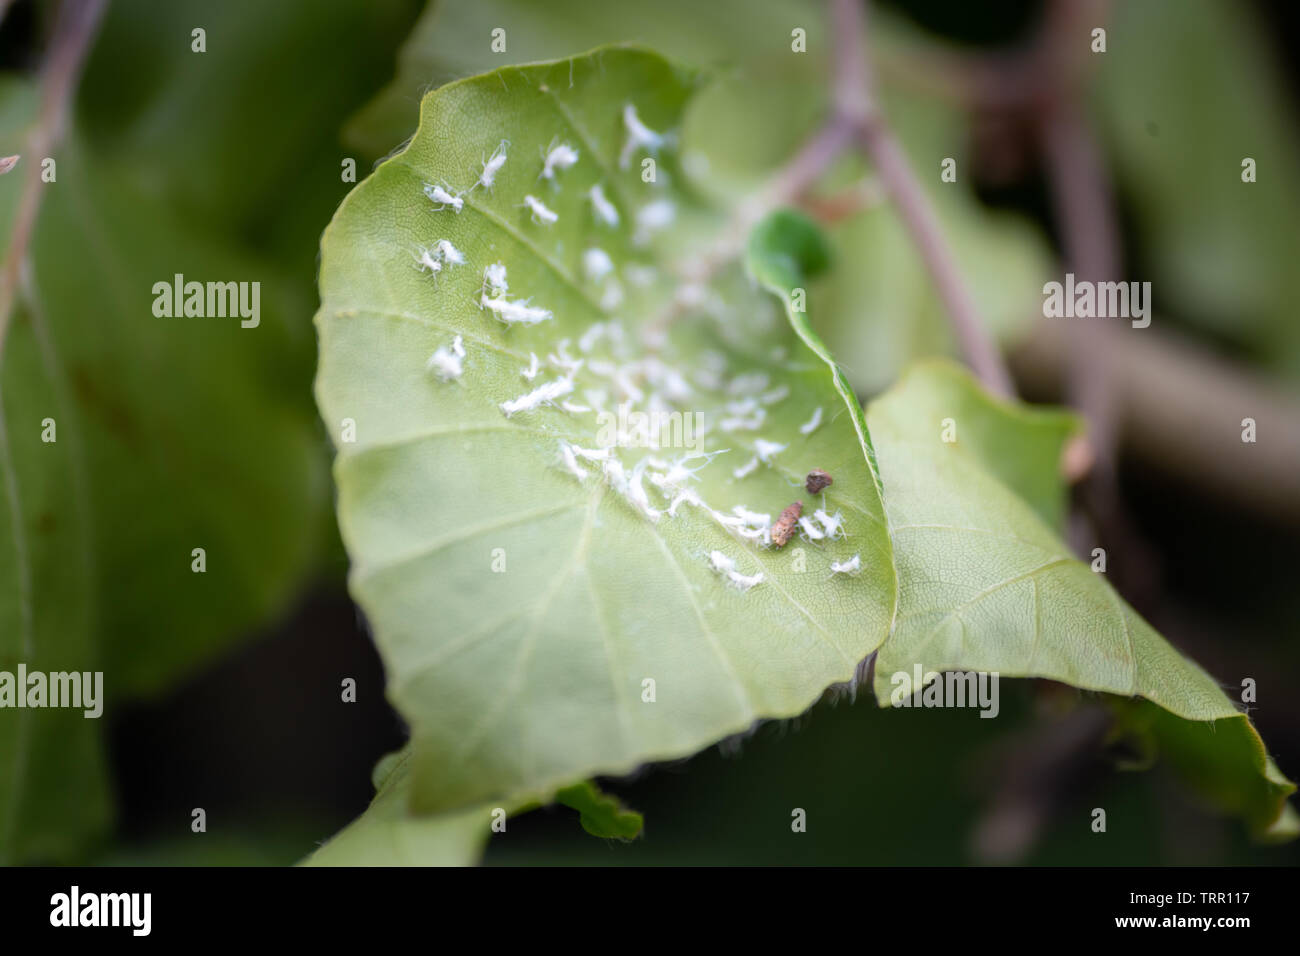 Close-up of mealybugs (Pseudococcidae) on leaves of a European hornbeam hedge. Stock Photo